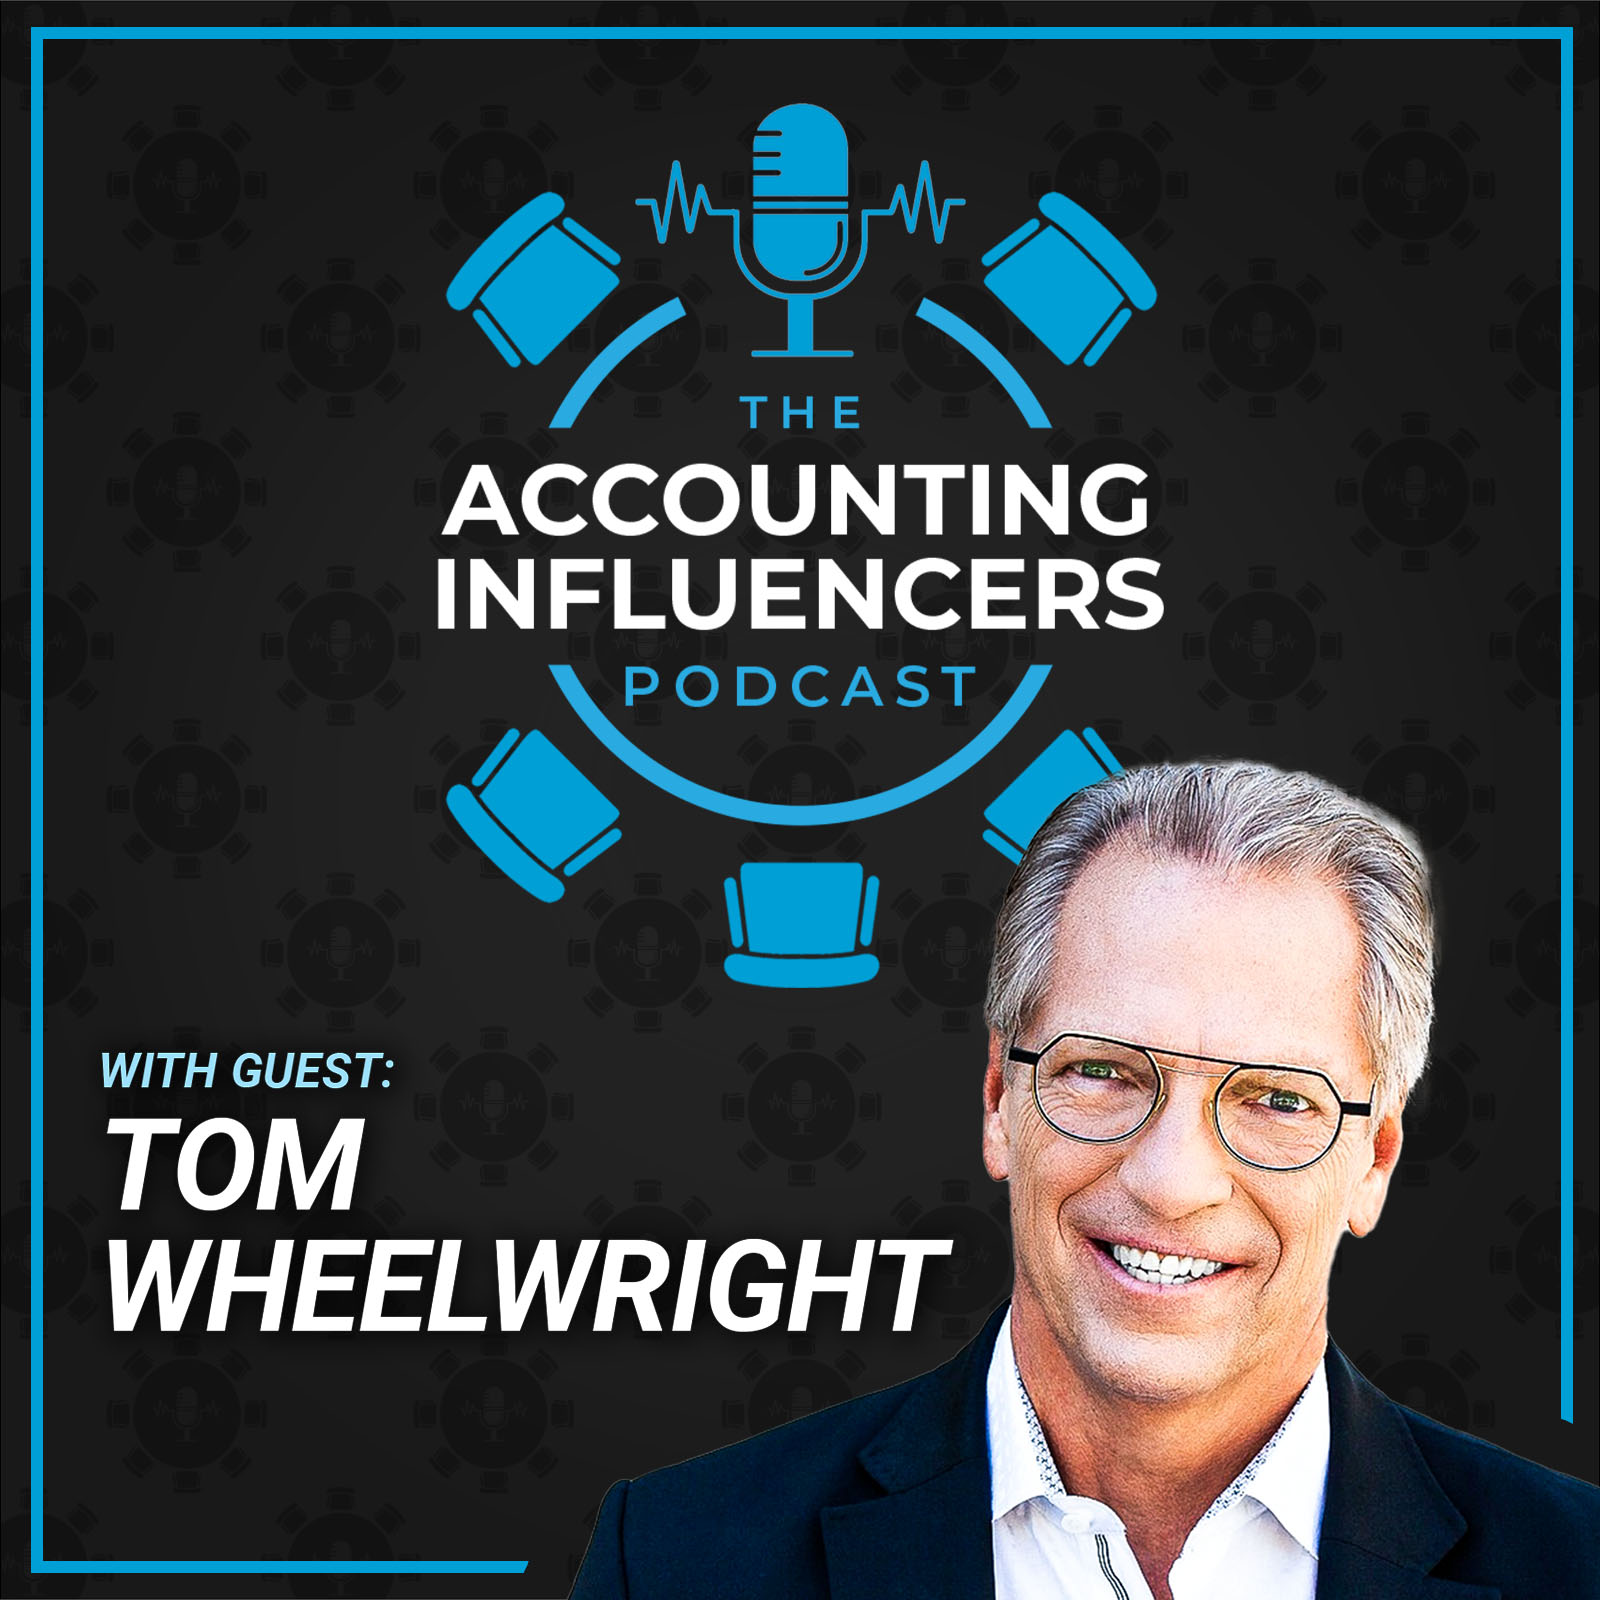 Artwork for podcast Accounting Influencers